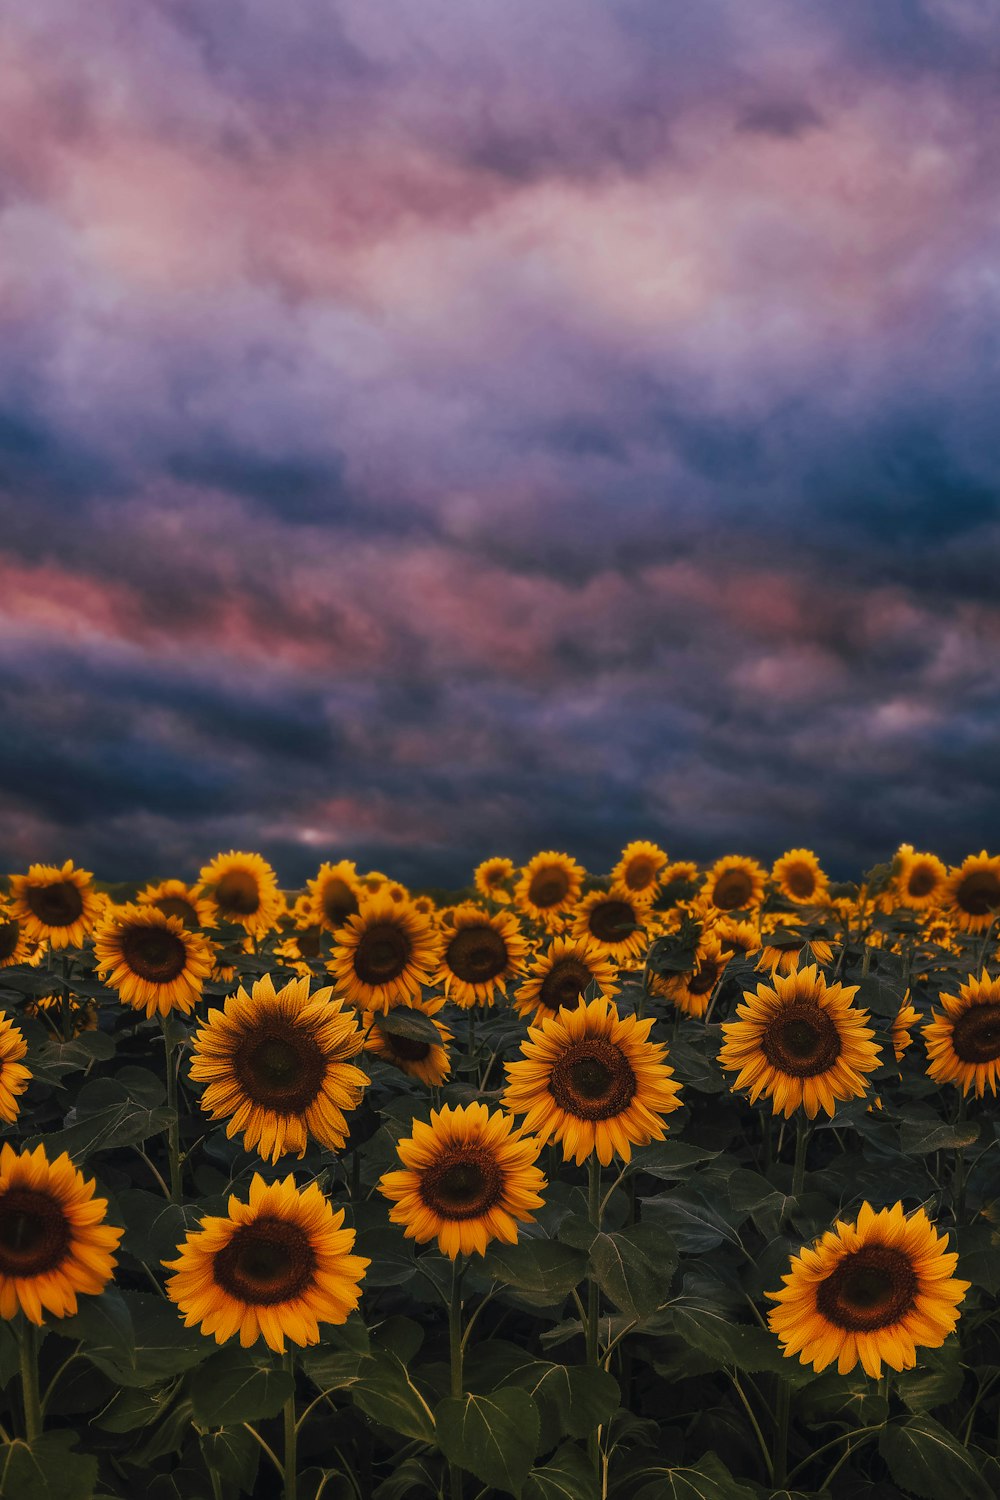 yellow sunflower field under cloudy sky during daytime